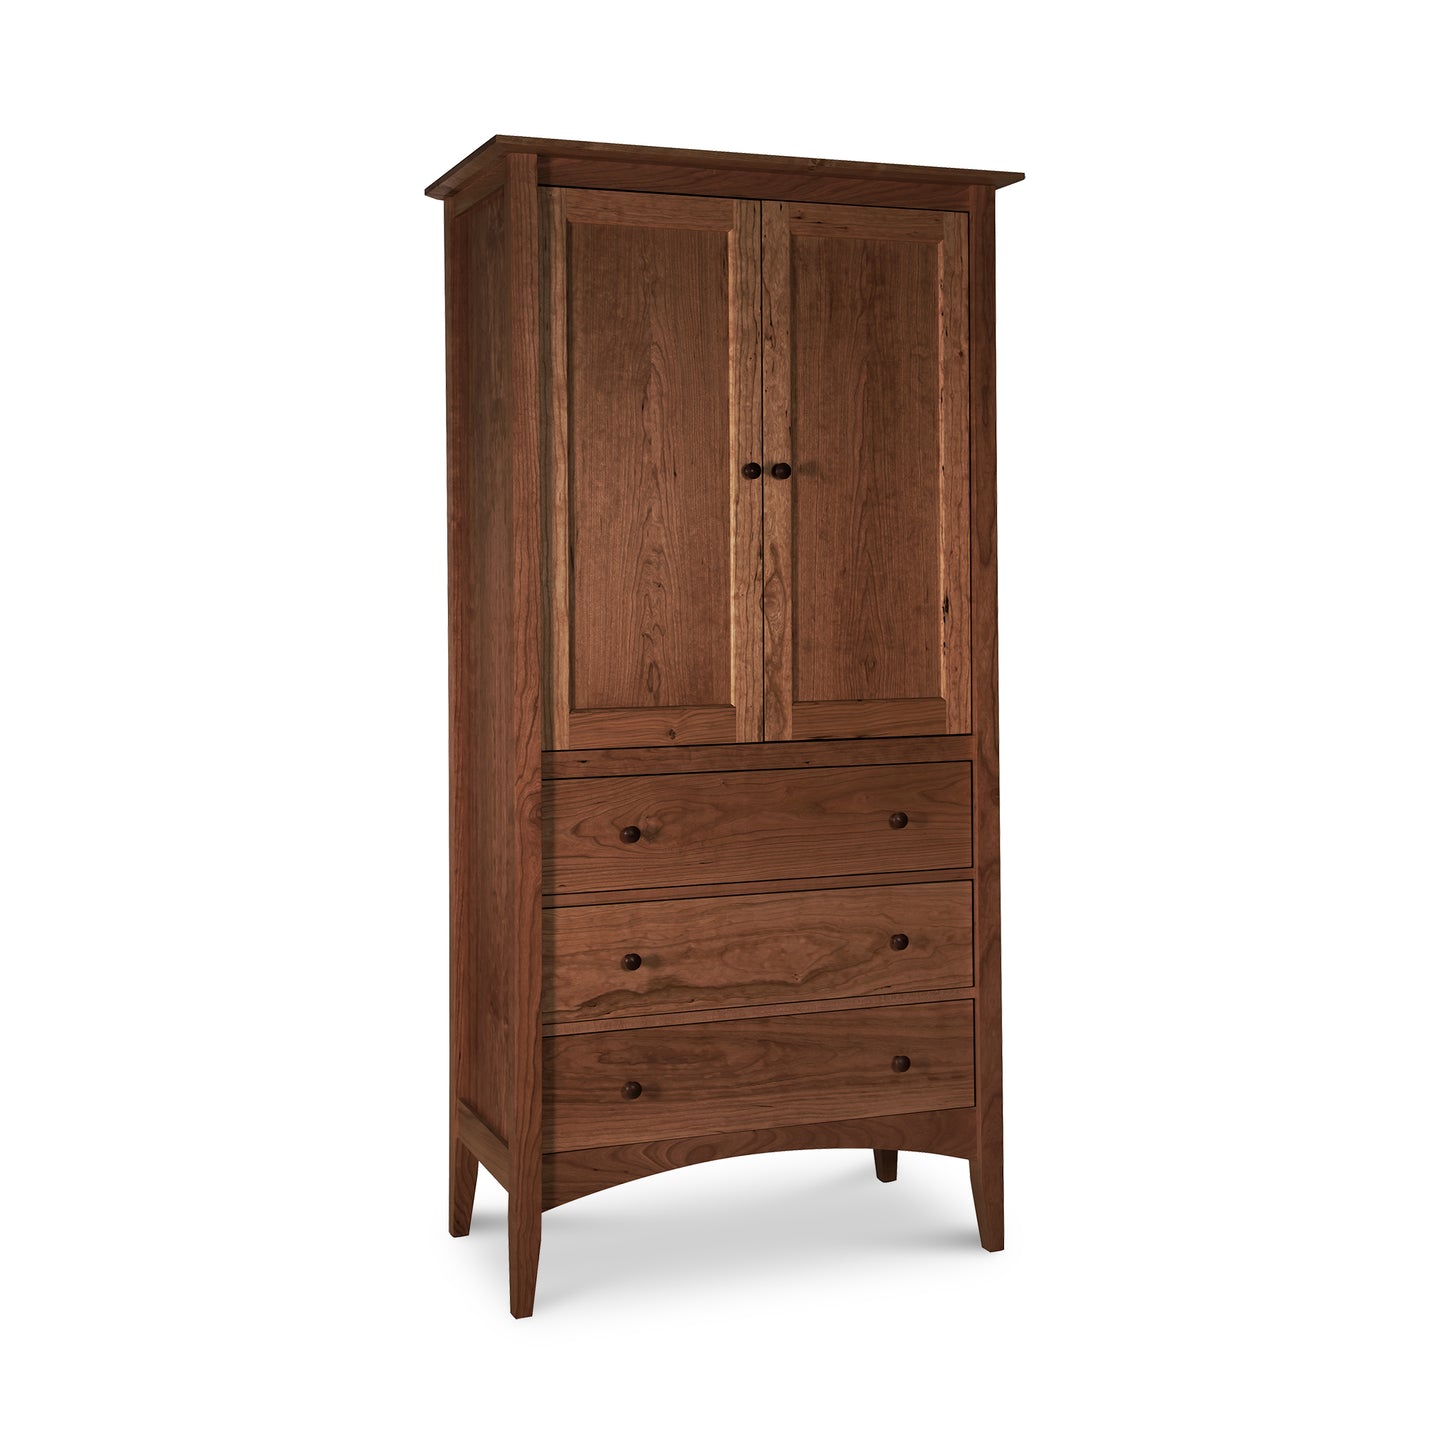 Solid wood Maple Corner Woodworks American Shaker Armoire with two cabinet doors above a set of four drawers, against a white background.